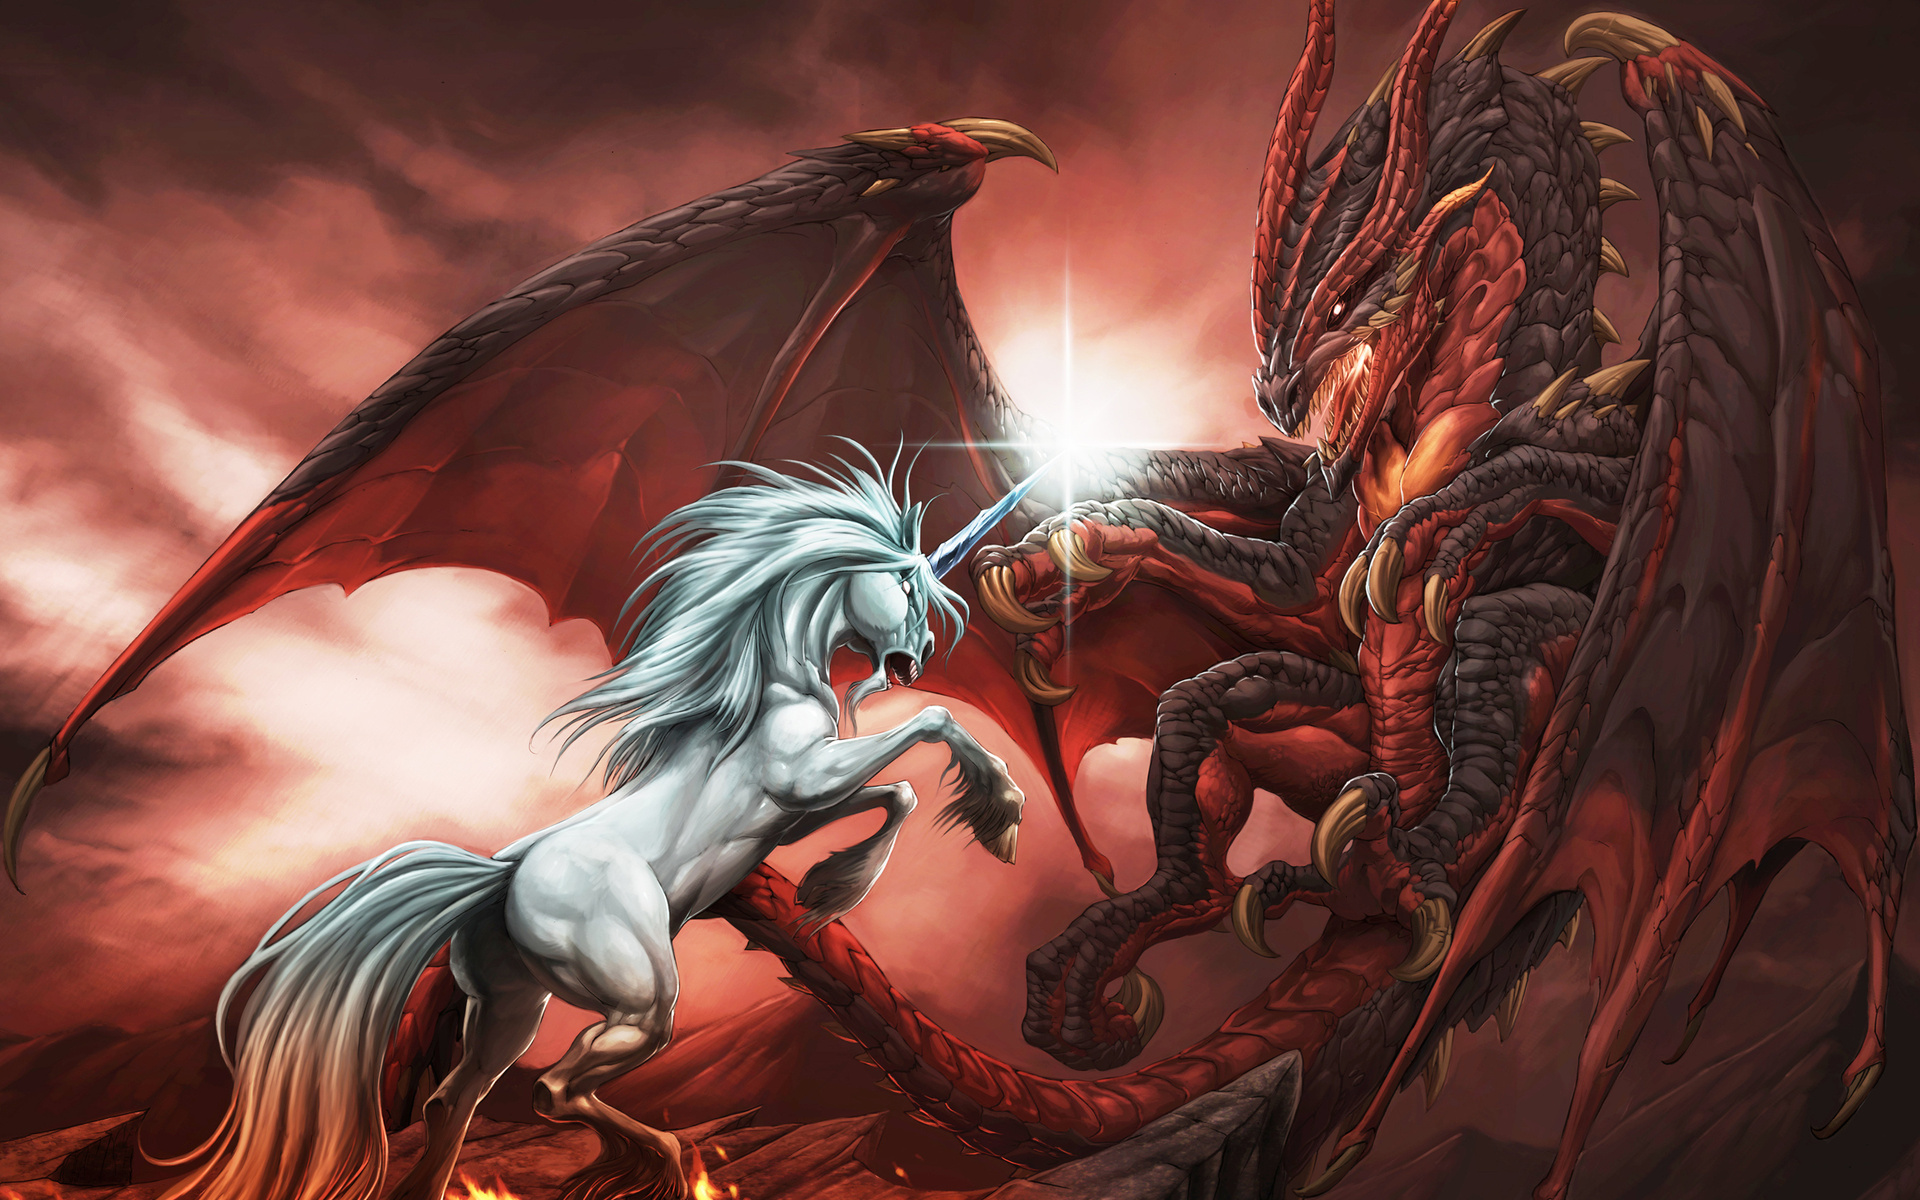 fantasy, Dragons, Unicorn, Animals, Mythical, Mystical, Magic, Battle, War, Fight, Wings, Mane, Fur, Red, Art, Cg, Digital, Paintings, Airbrushing, Situation, Landscapes, Mountains, Horn, Fire, Flames, Sky, Cloud Wallpaper